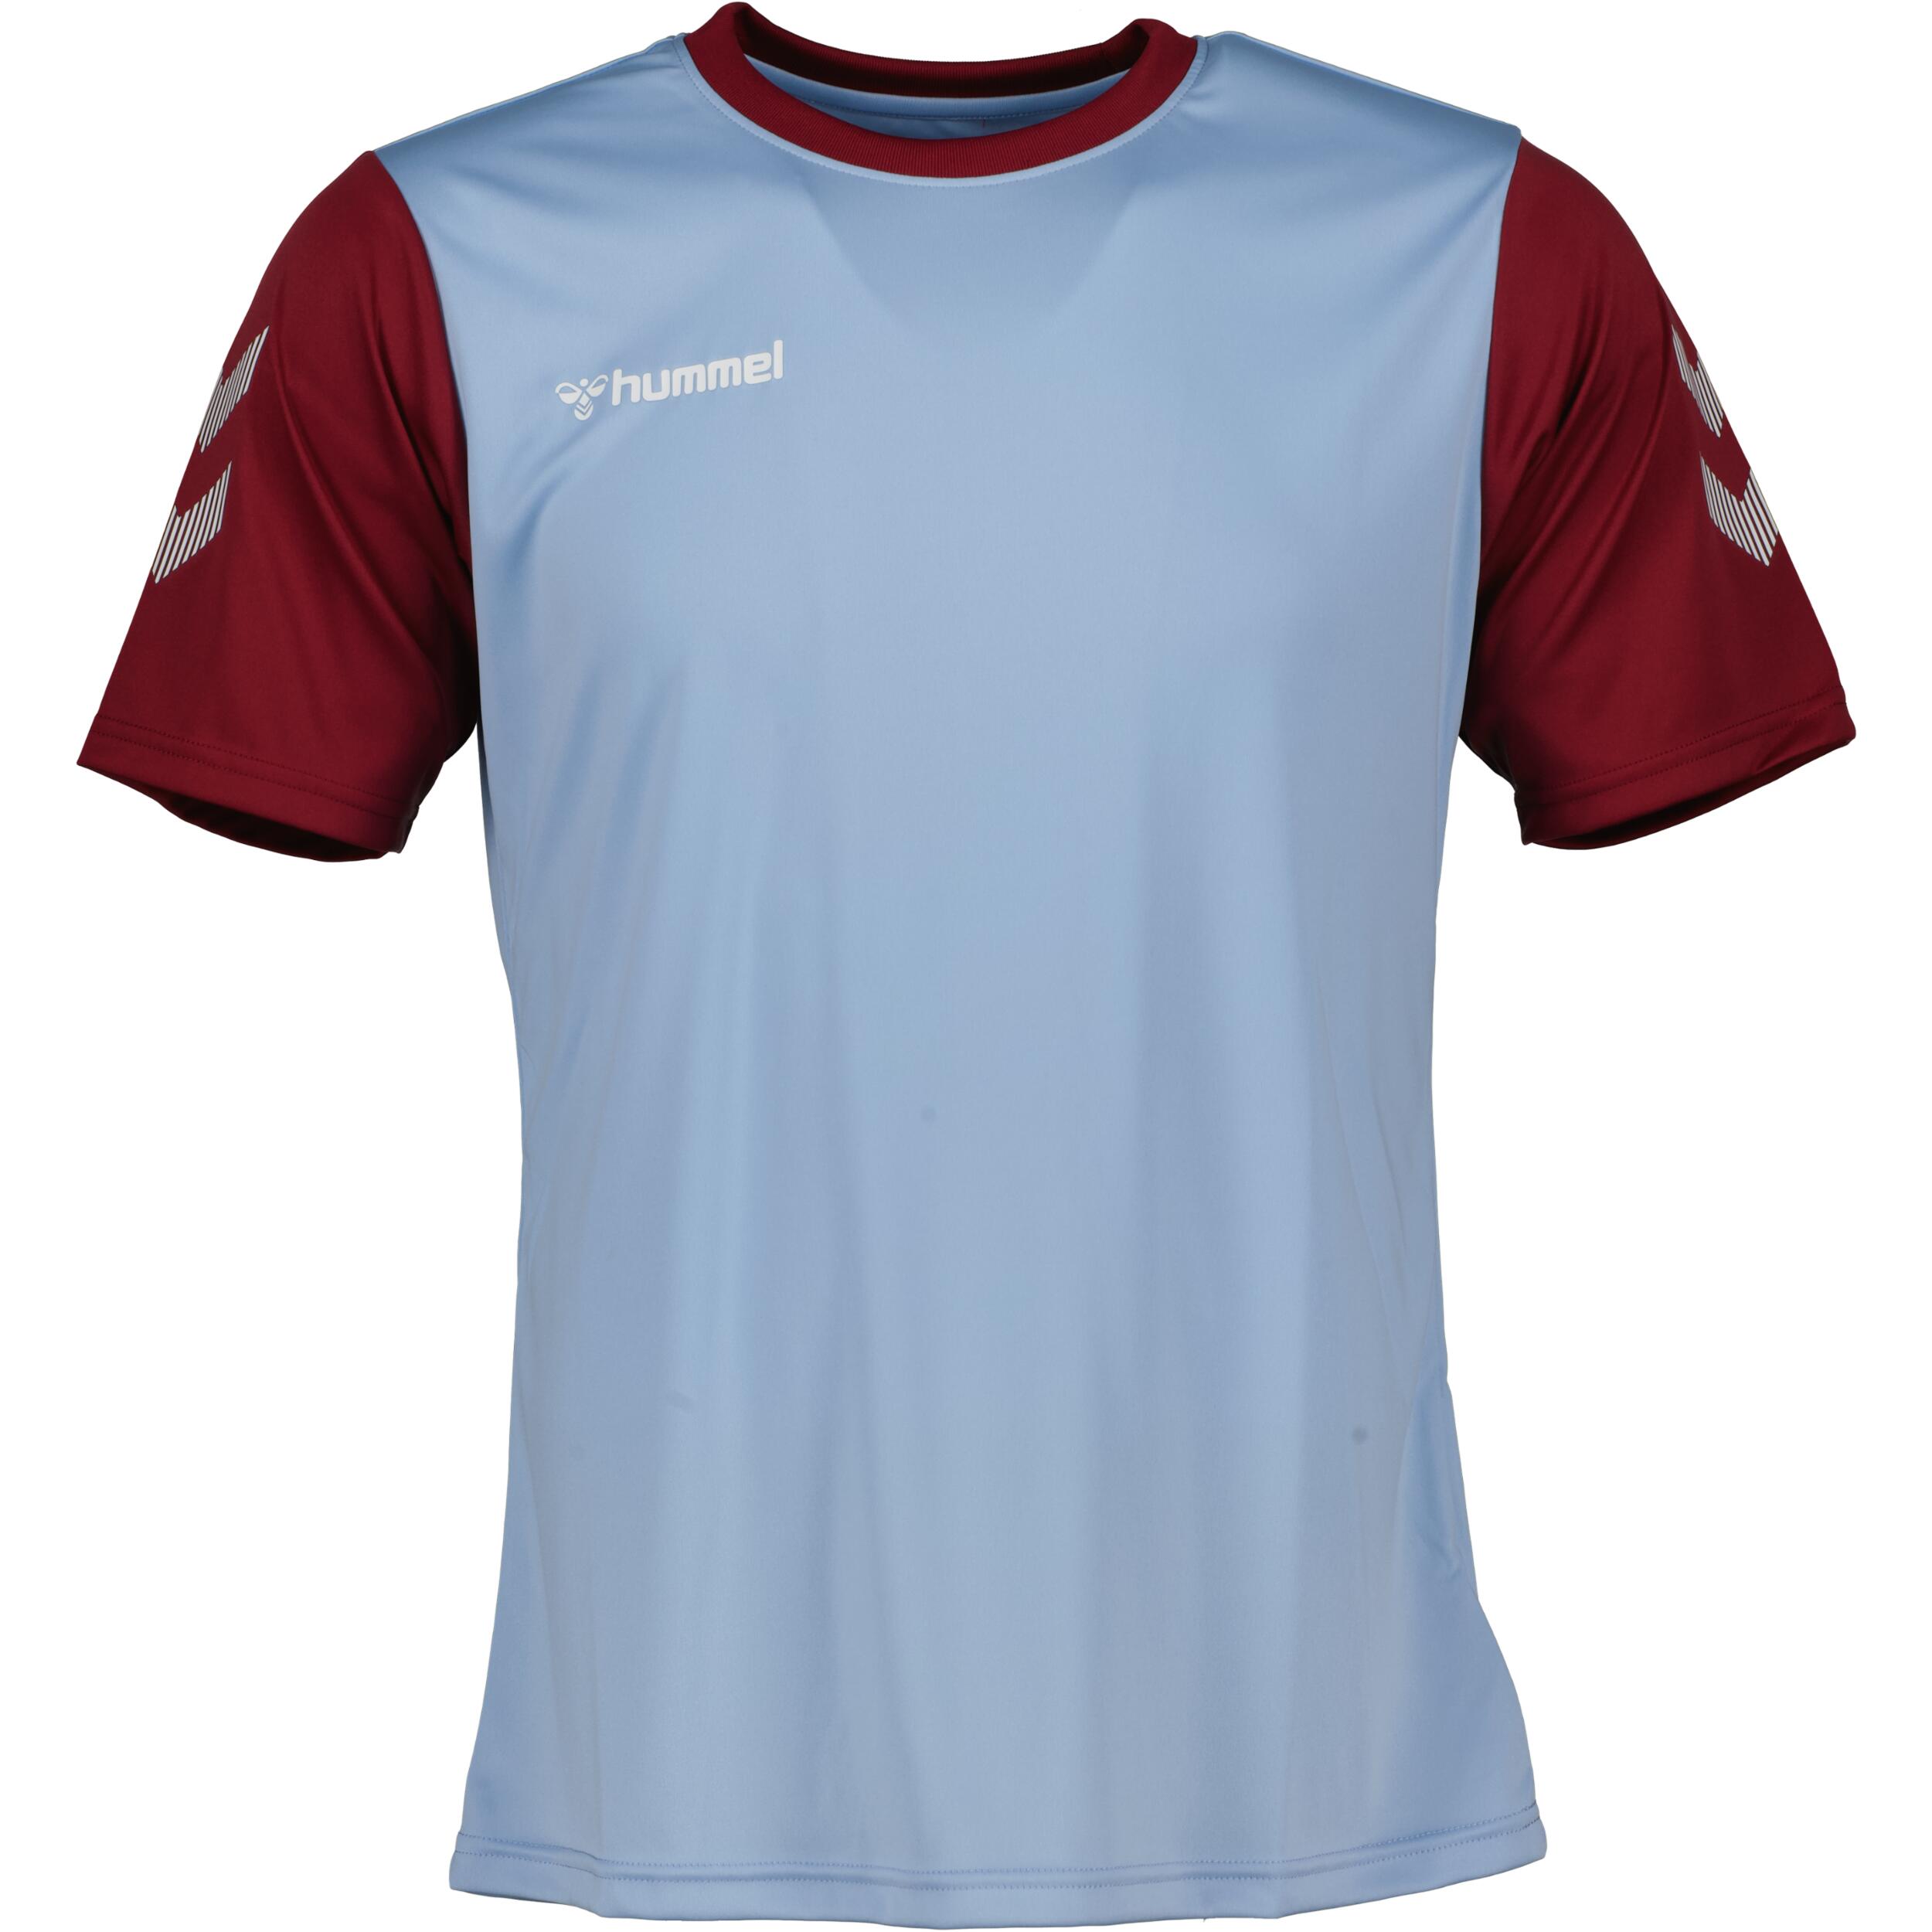 Match jersey for men, great for football, in argentina blue/maroon 1/3